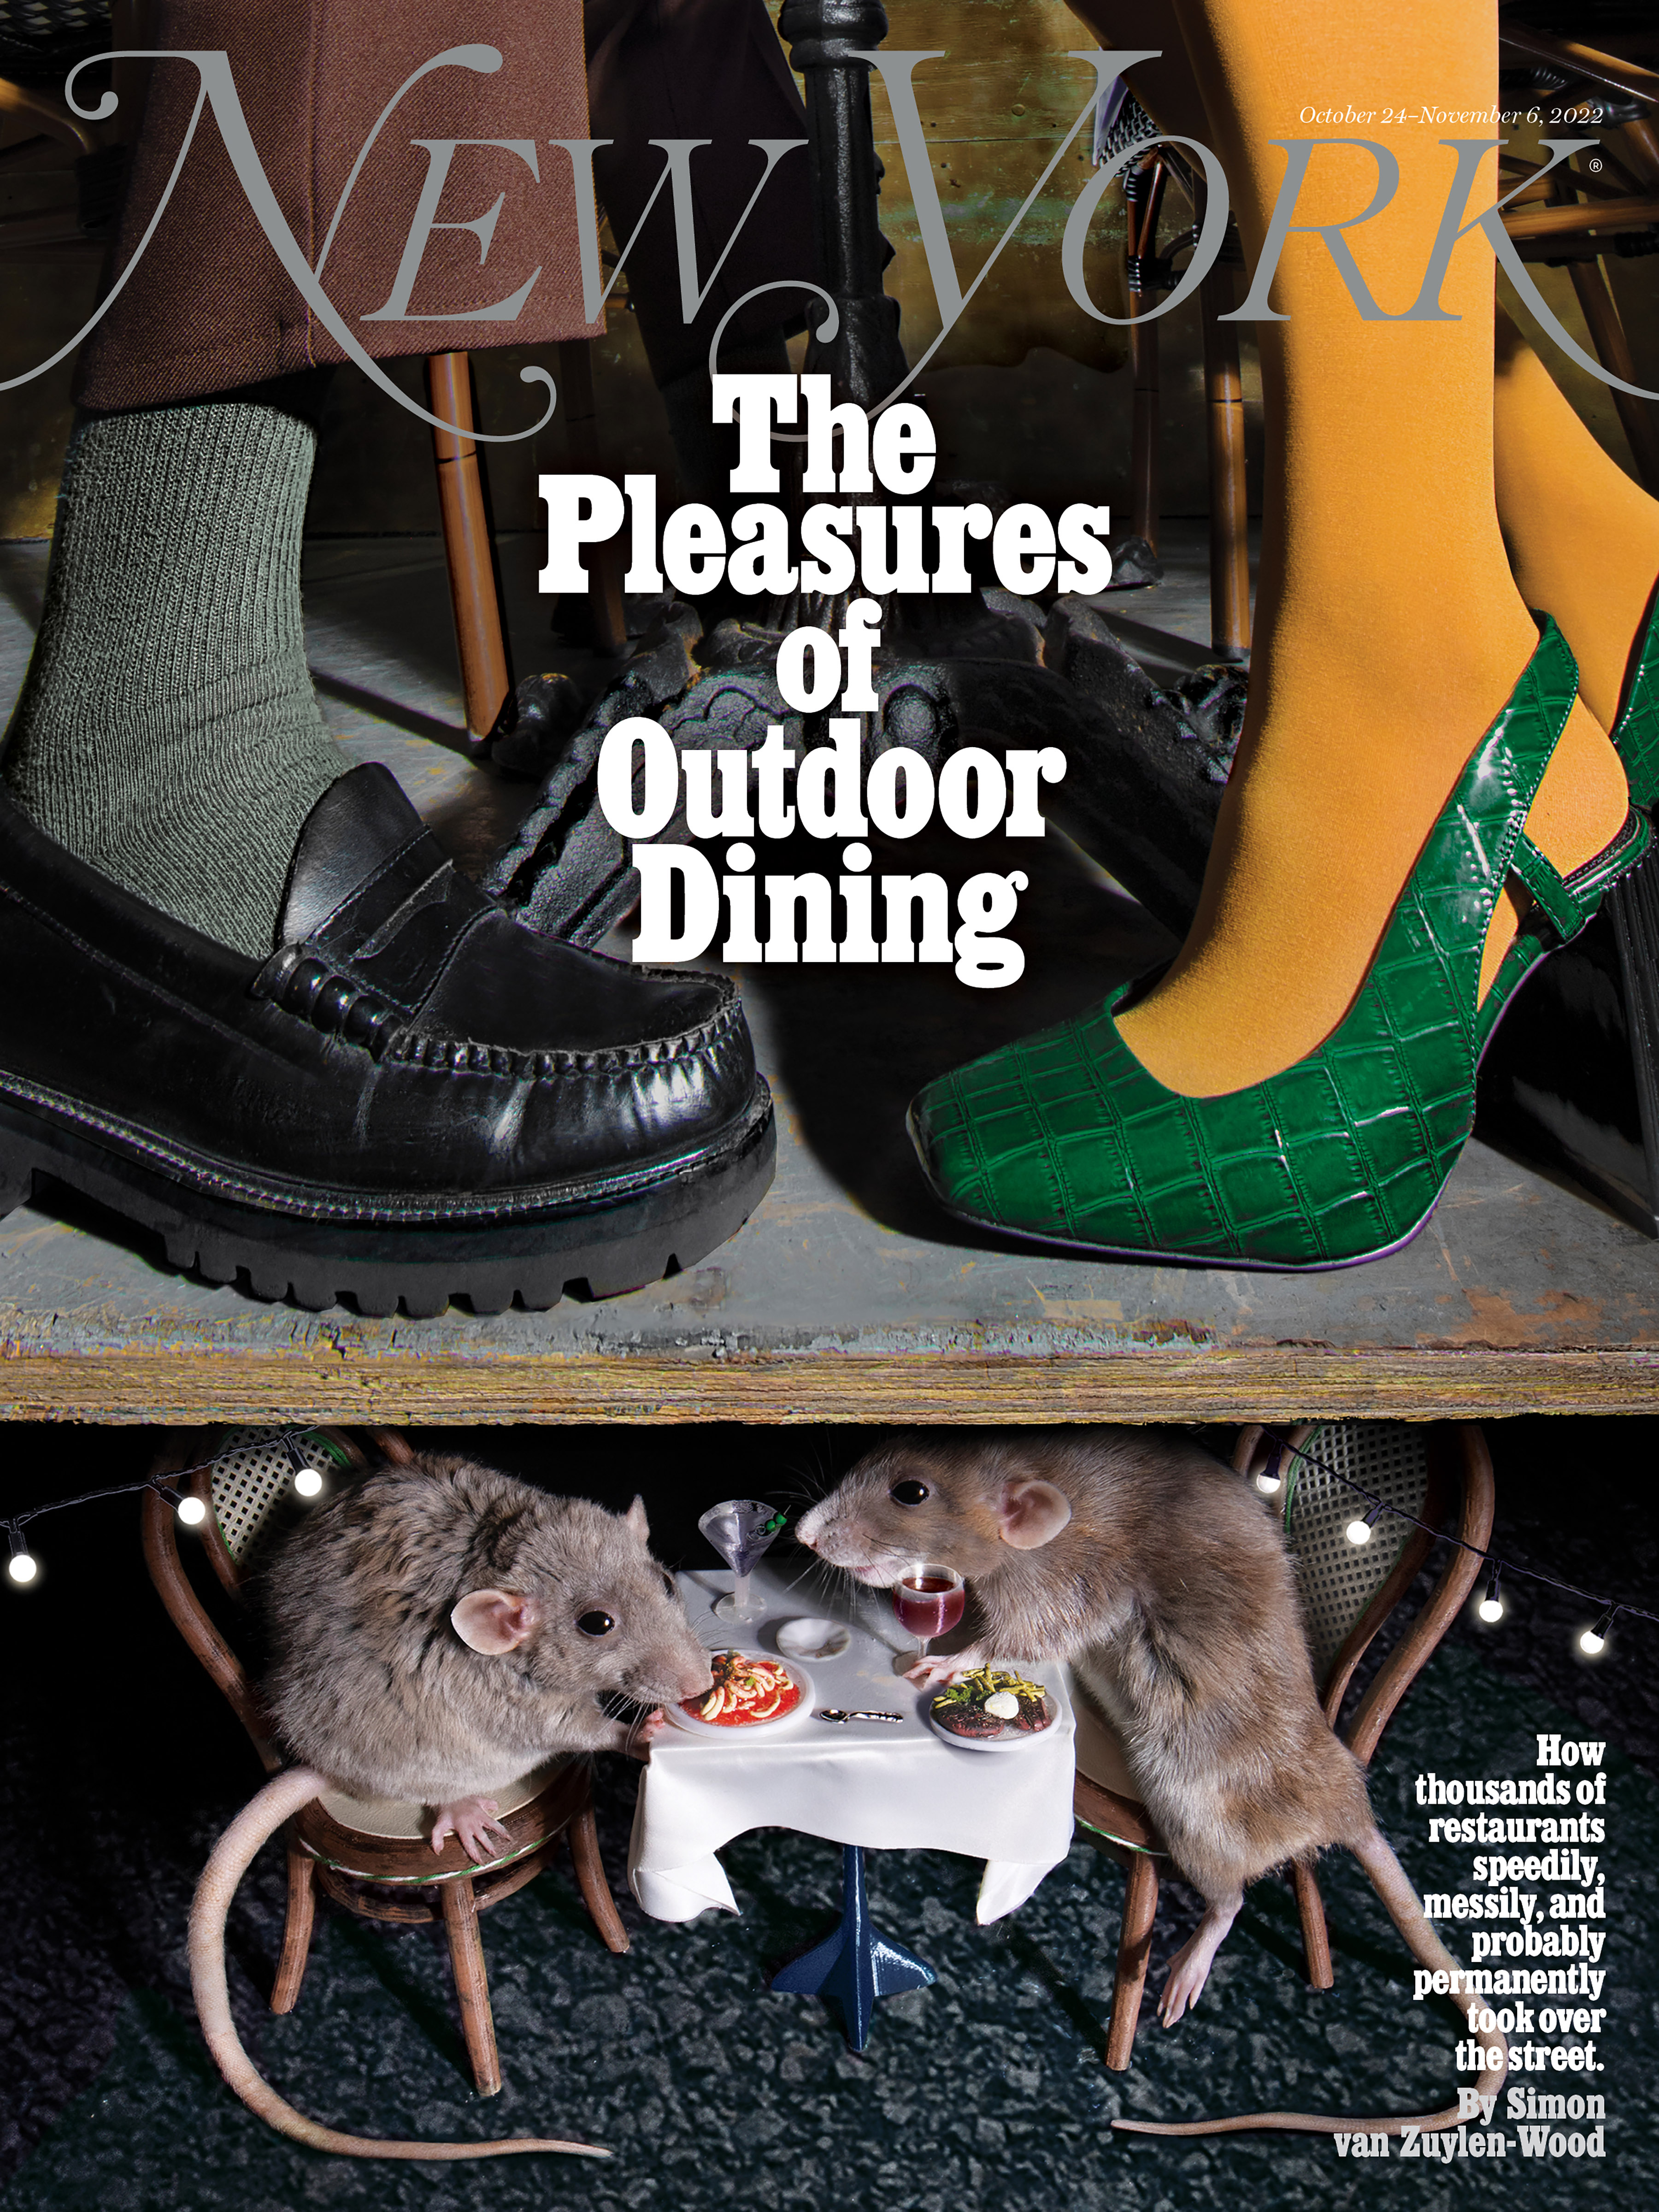 New York for “The Pleasures of Outdoor Dining,” October 24–November 6